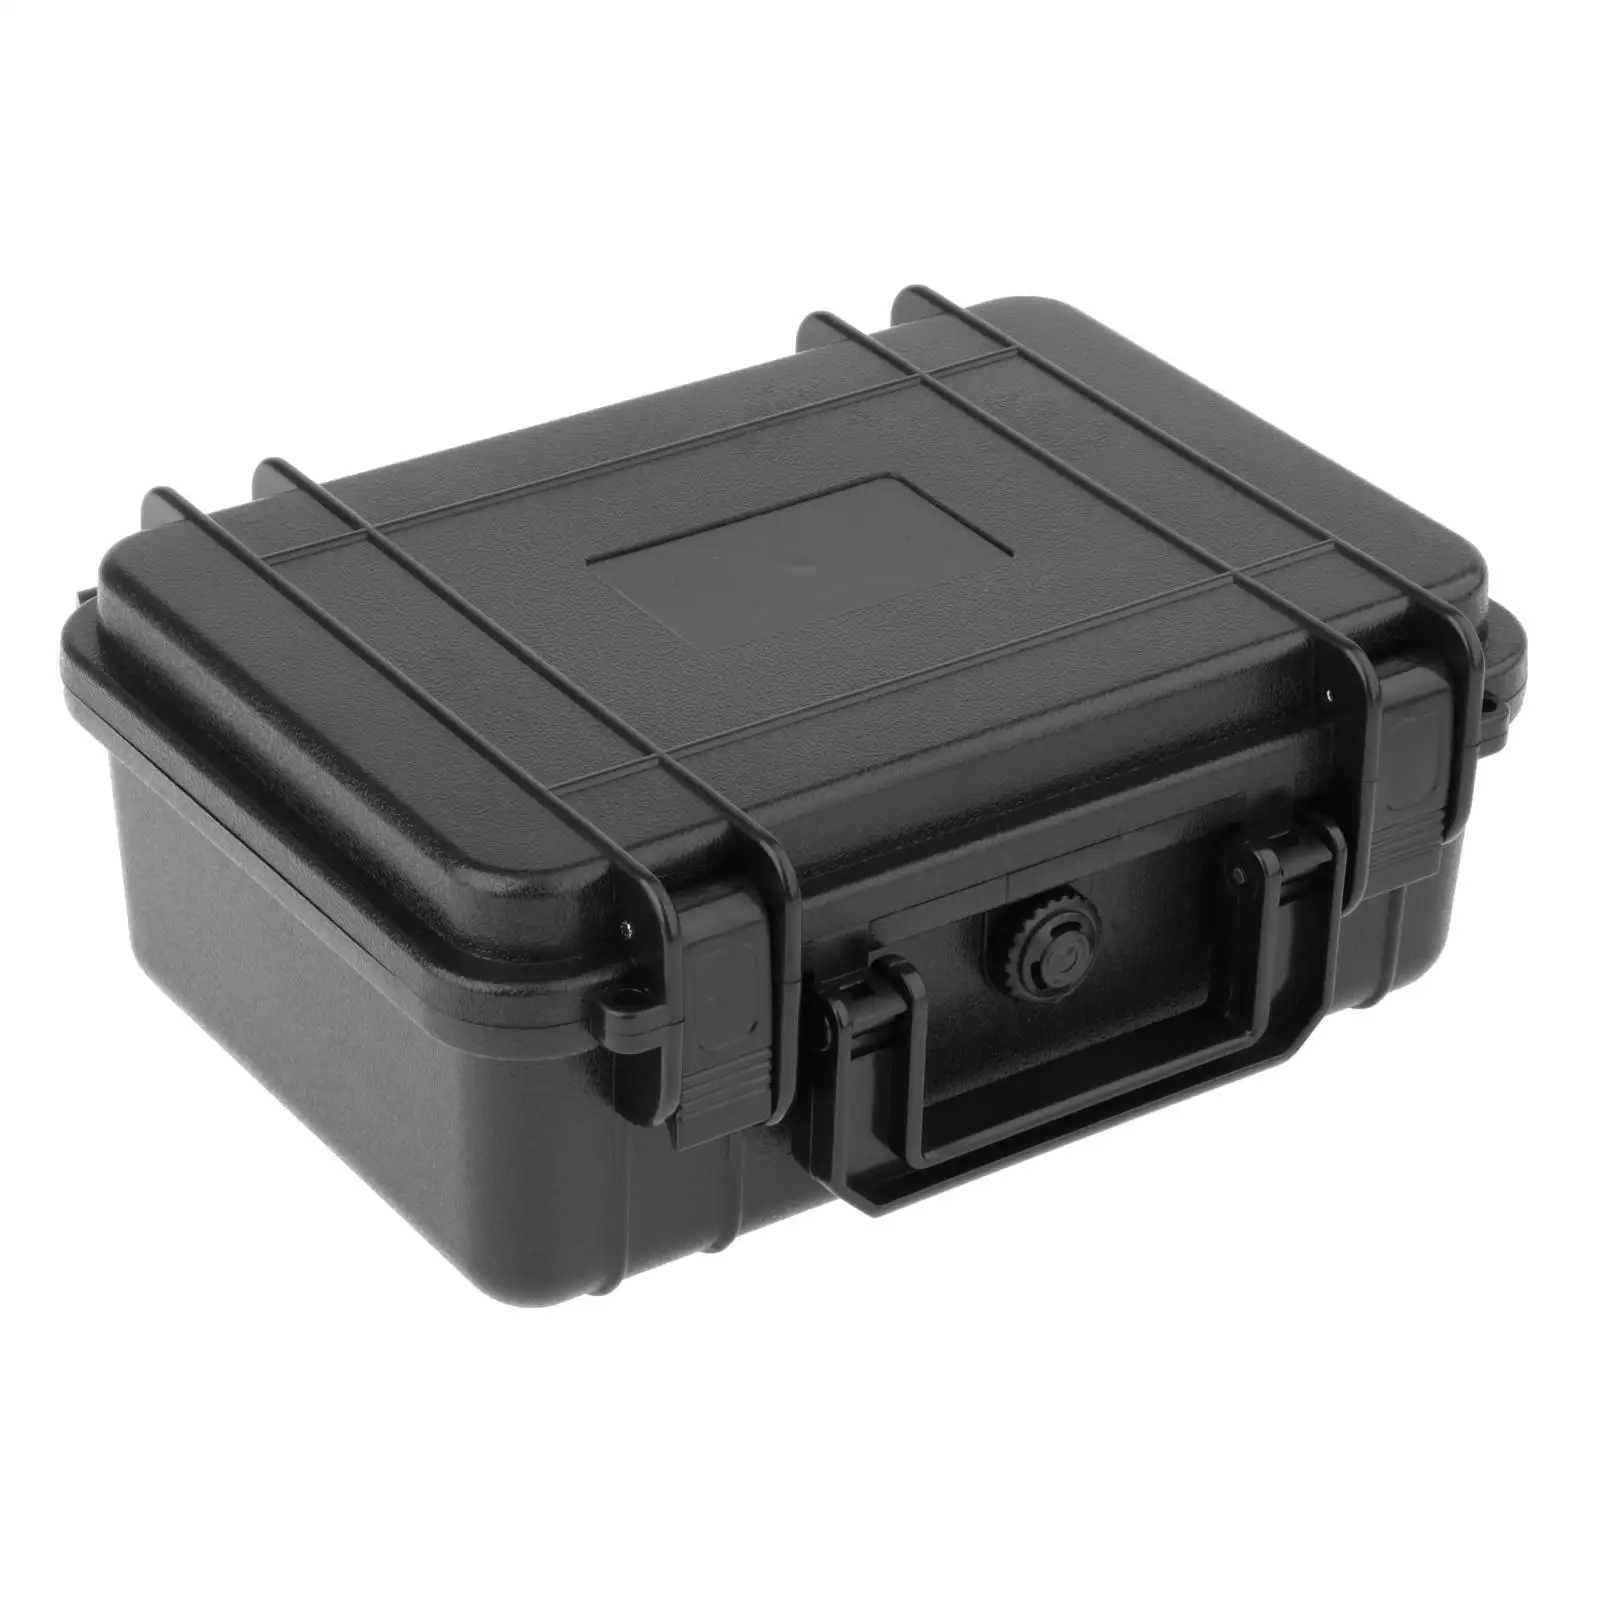 Multifunctional Tool Case Tool Organizer Tool Box Carrying Case Waterproof Pouch Suitcase Shockproof for Tools Screwdriver